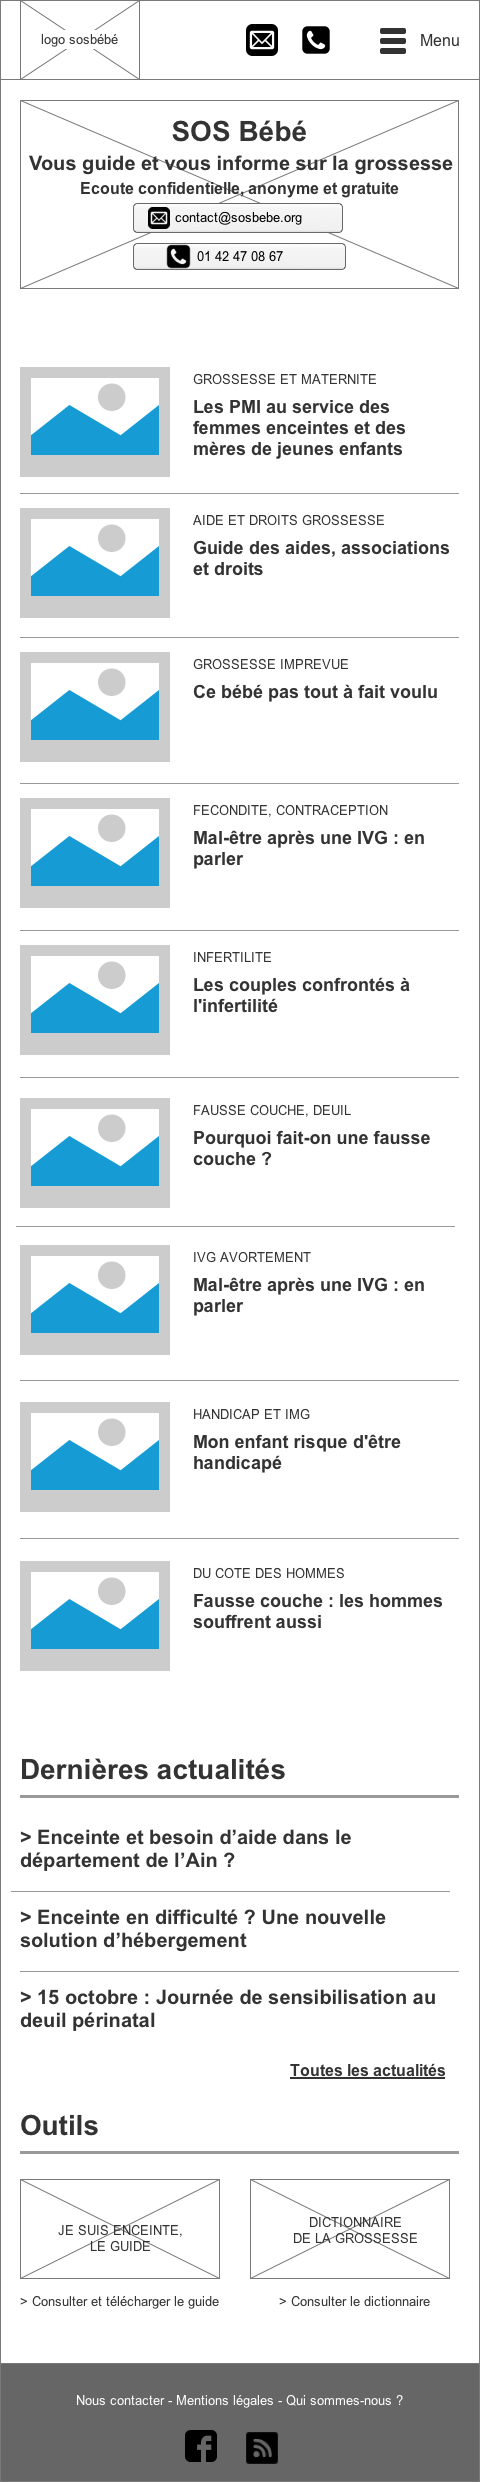 Wireframe page d'accueil, version moble